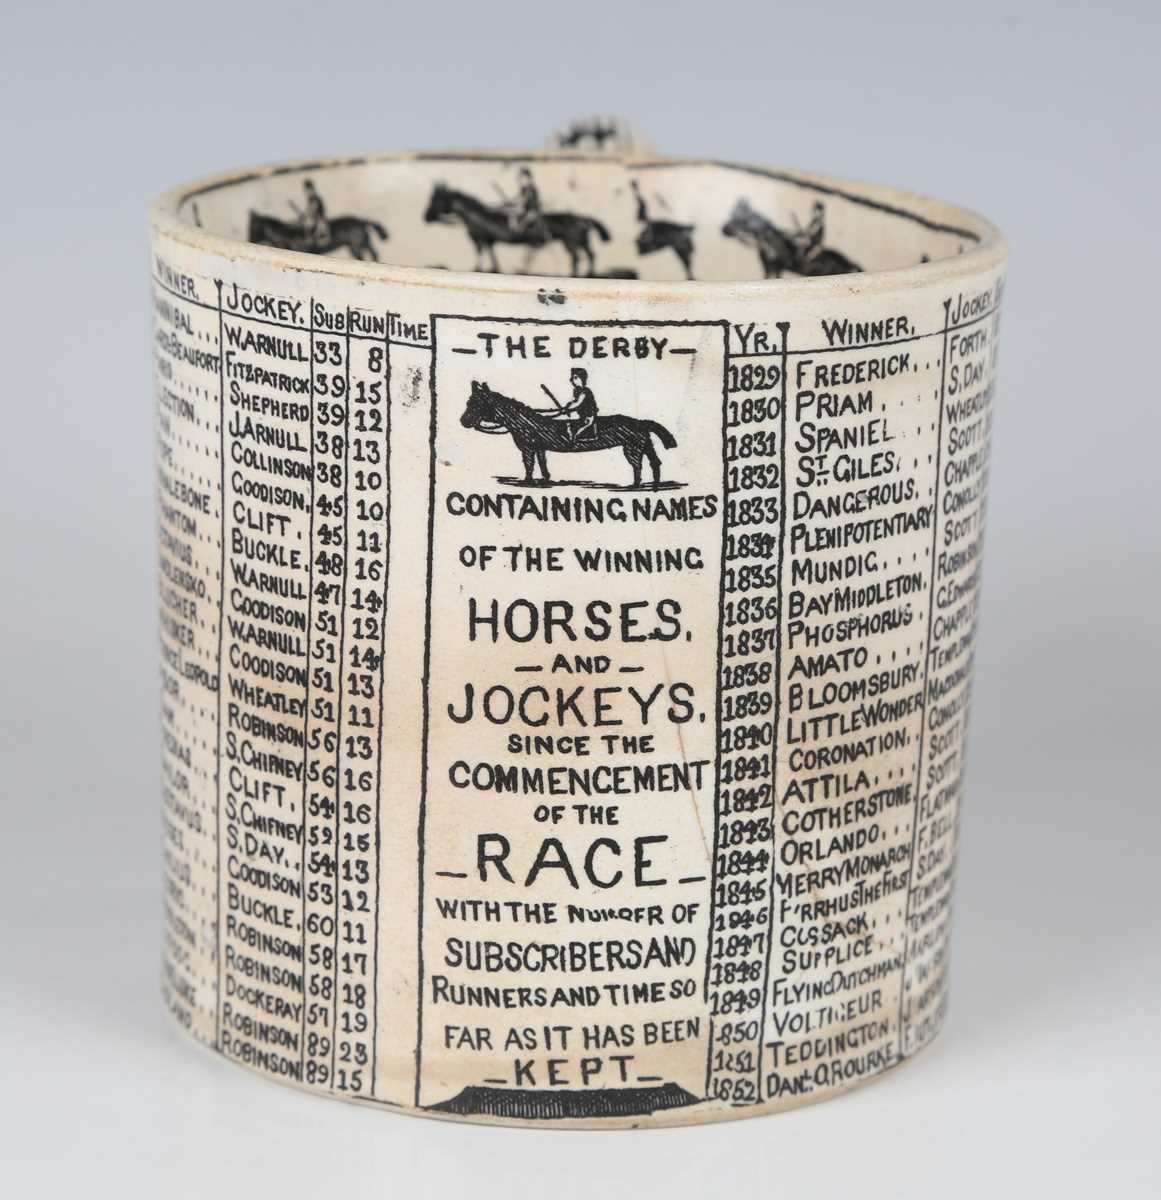 A Lloyd & Co. pottery commemorative horse racing tankard, circa 1876, printed in black with a list